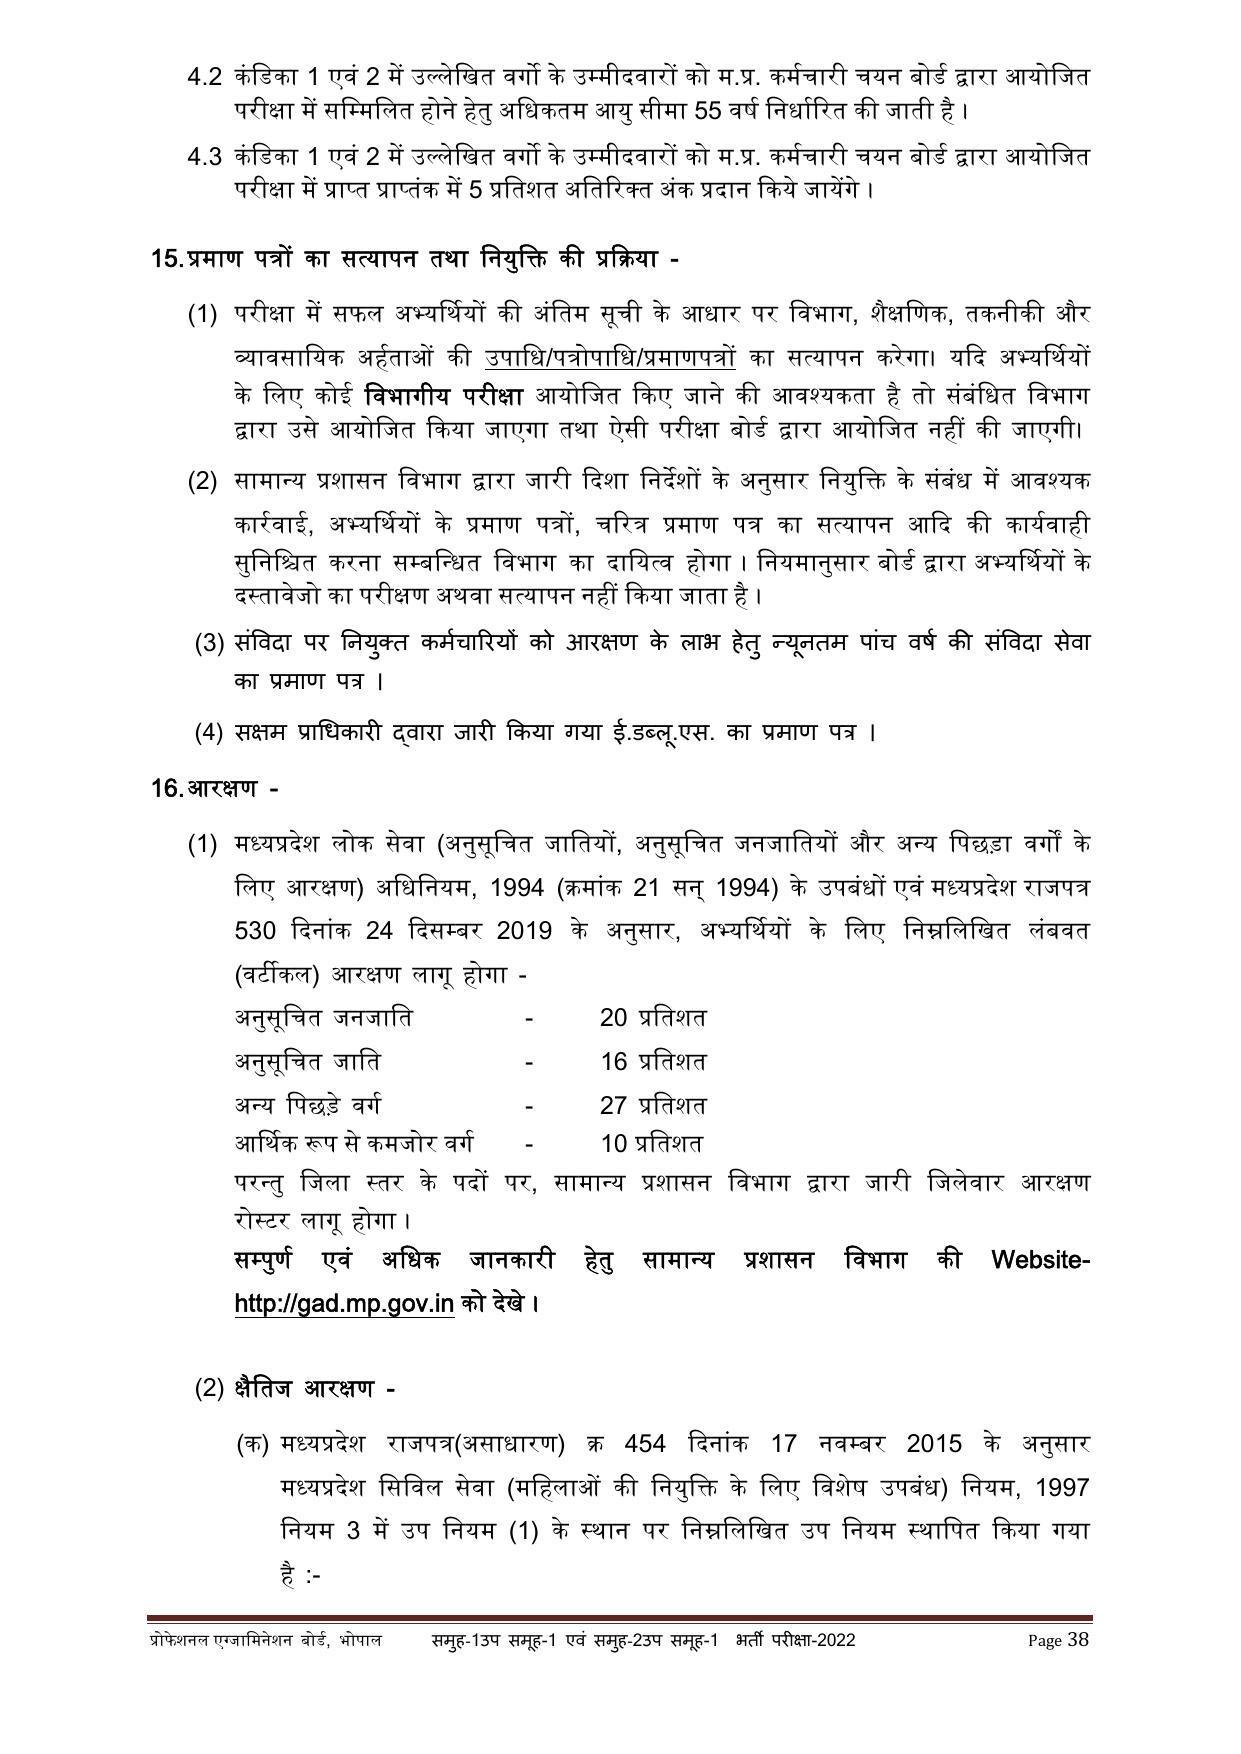 MPPEB Group-I Sub Group-I & Group-II Sub Group-I Recruitment 2022 - Page 9